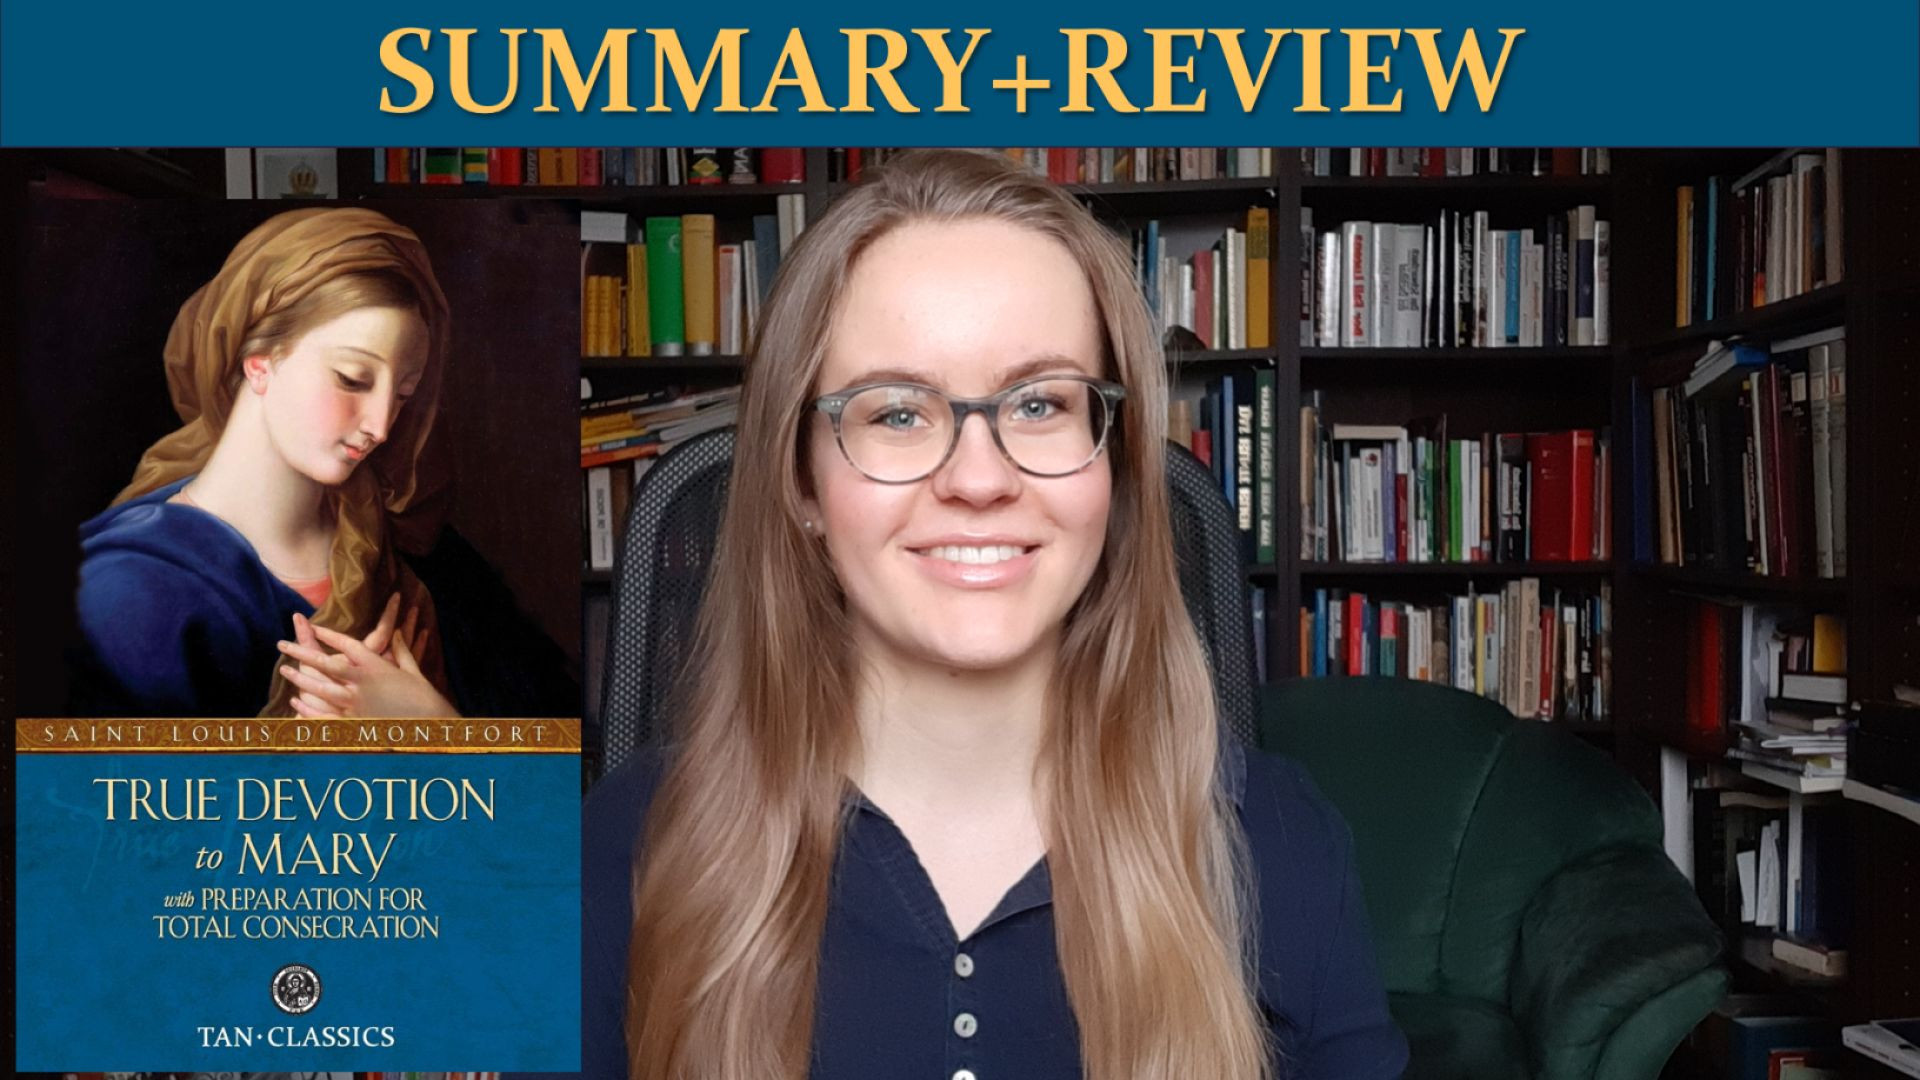 True Devotion to Mary by St. Louis de Montfort (Summary+Review)